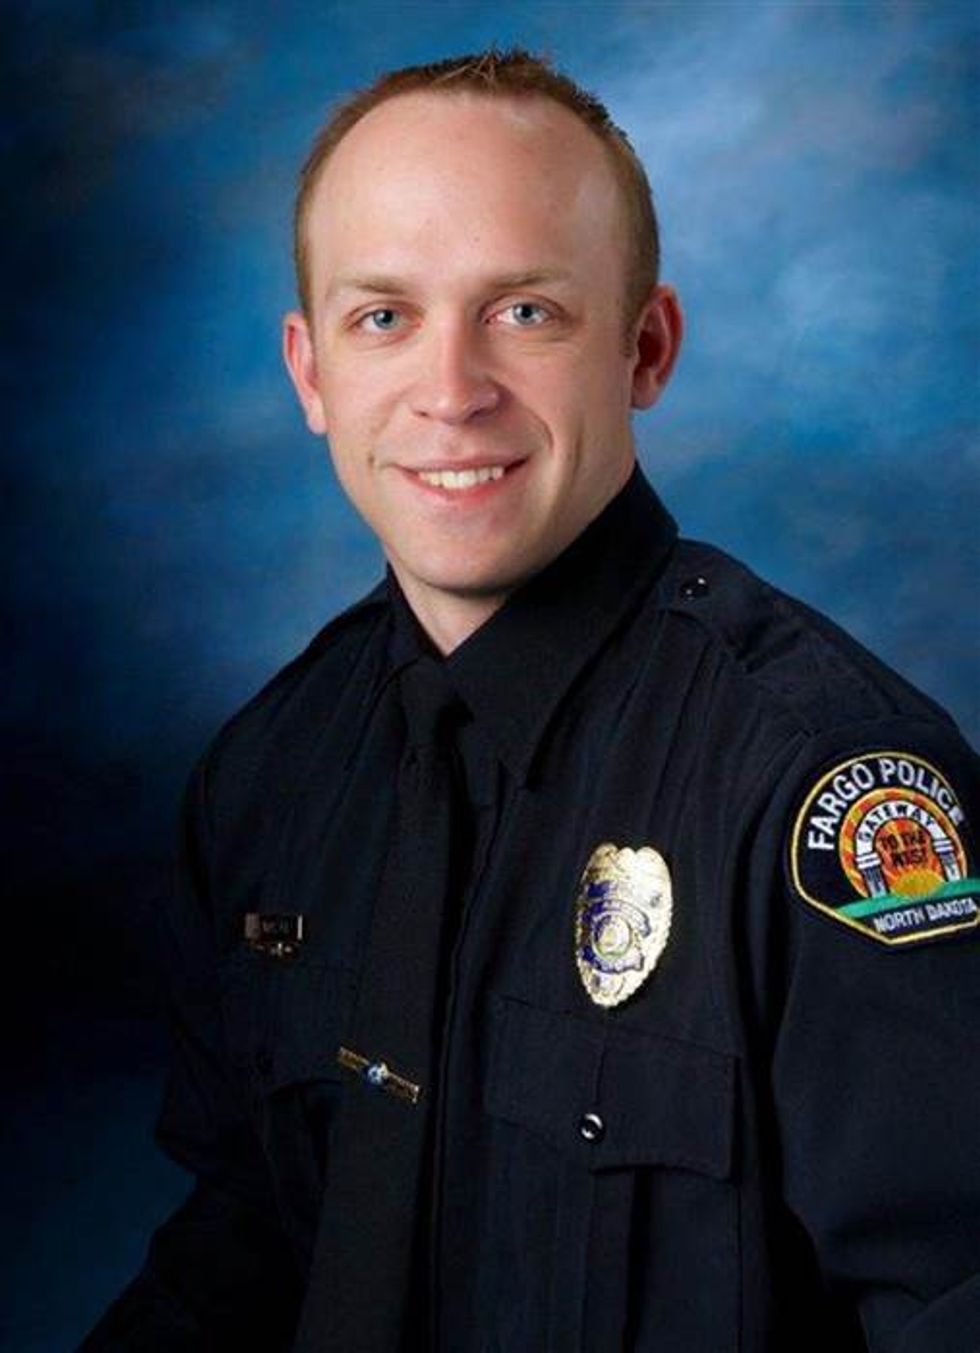 Officer Shot During Standoff in North Dakota Not Expected to Survive